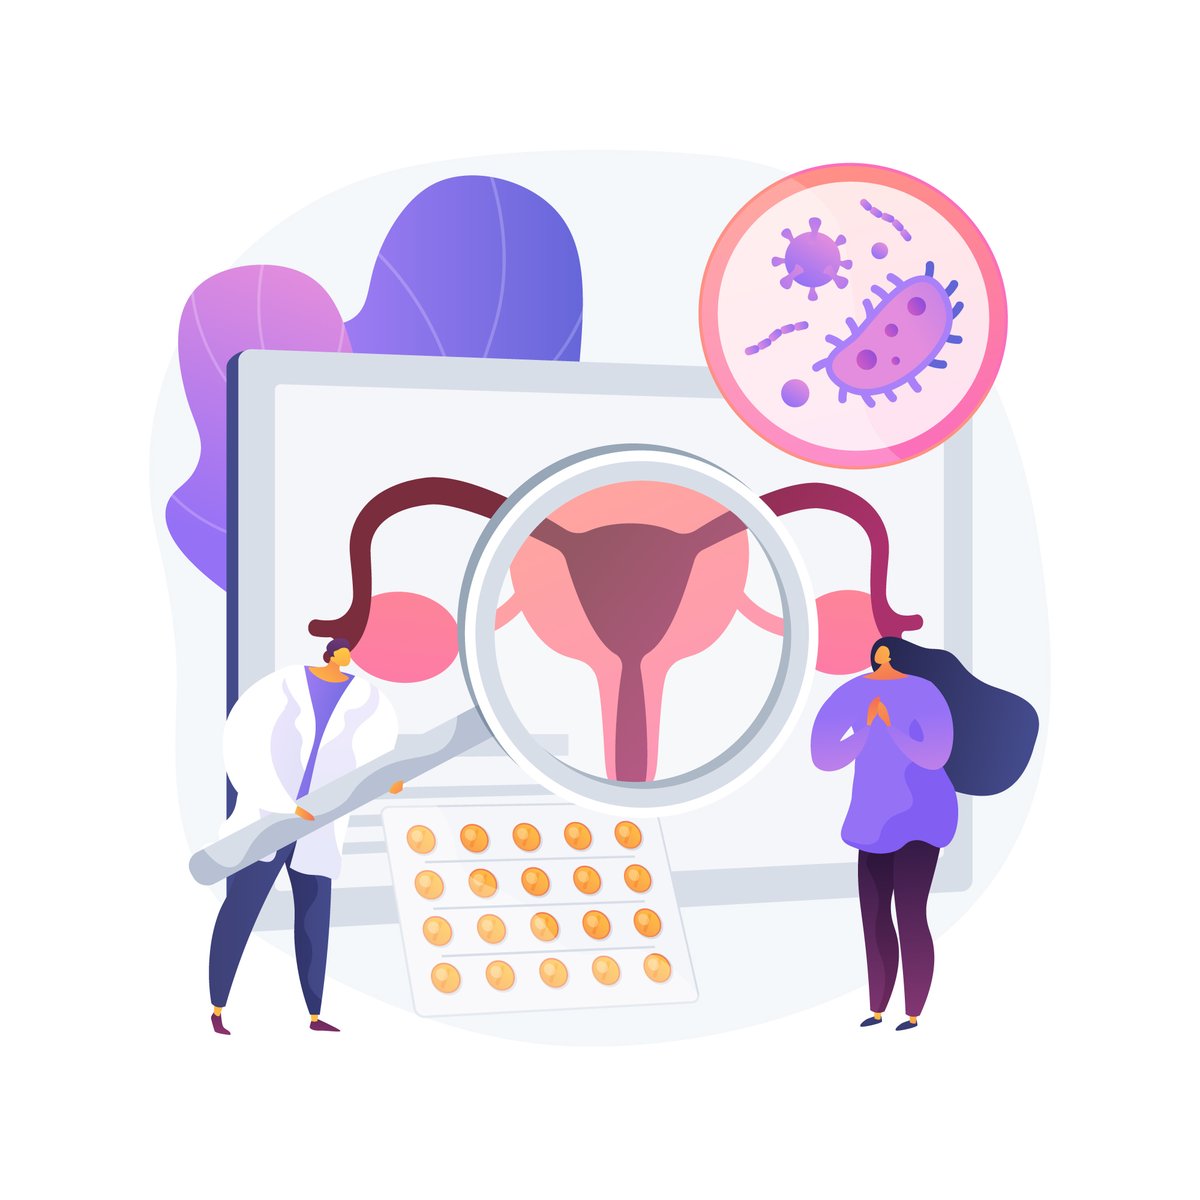 Untreated #STIs can cause pelvic inflammatory disease (PID), a serious condition, in women. Learn how to reduce your risk of getting PID: bit.ly/2OtolRe